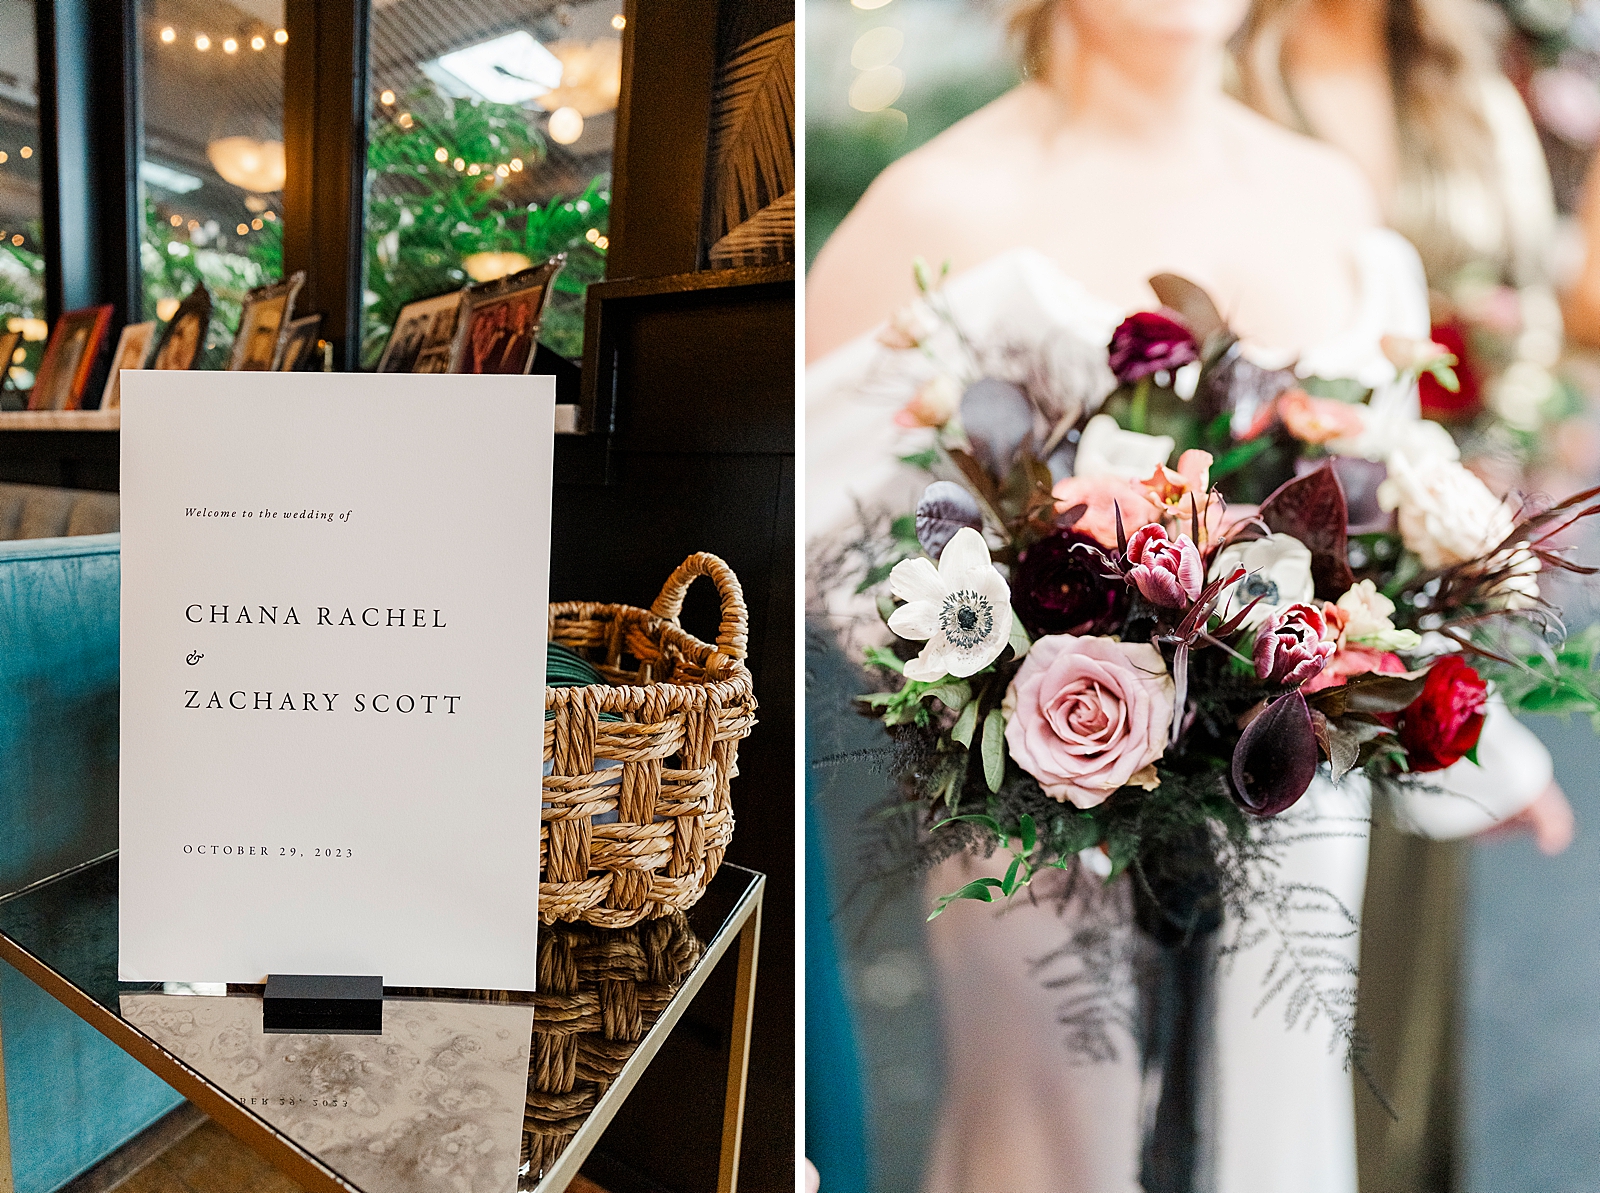 Left photo: Shot of a welcome sign featuring the couple's names and wedding date. 
Right photo: Close up shot of the bride's bouquet. 